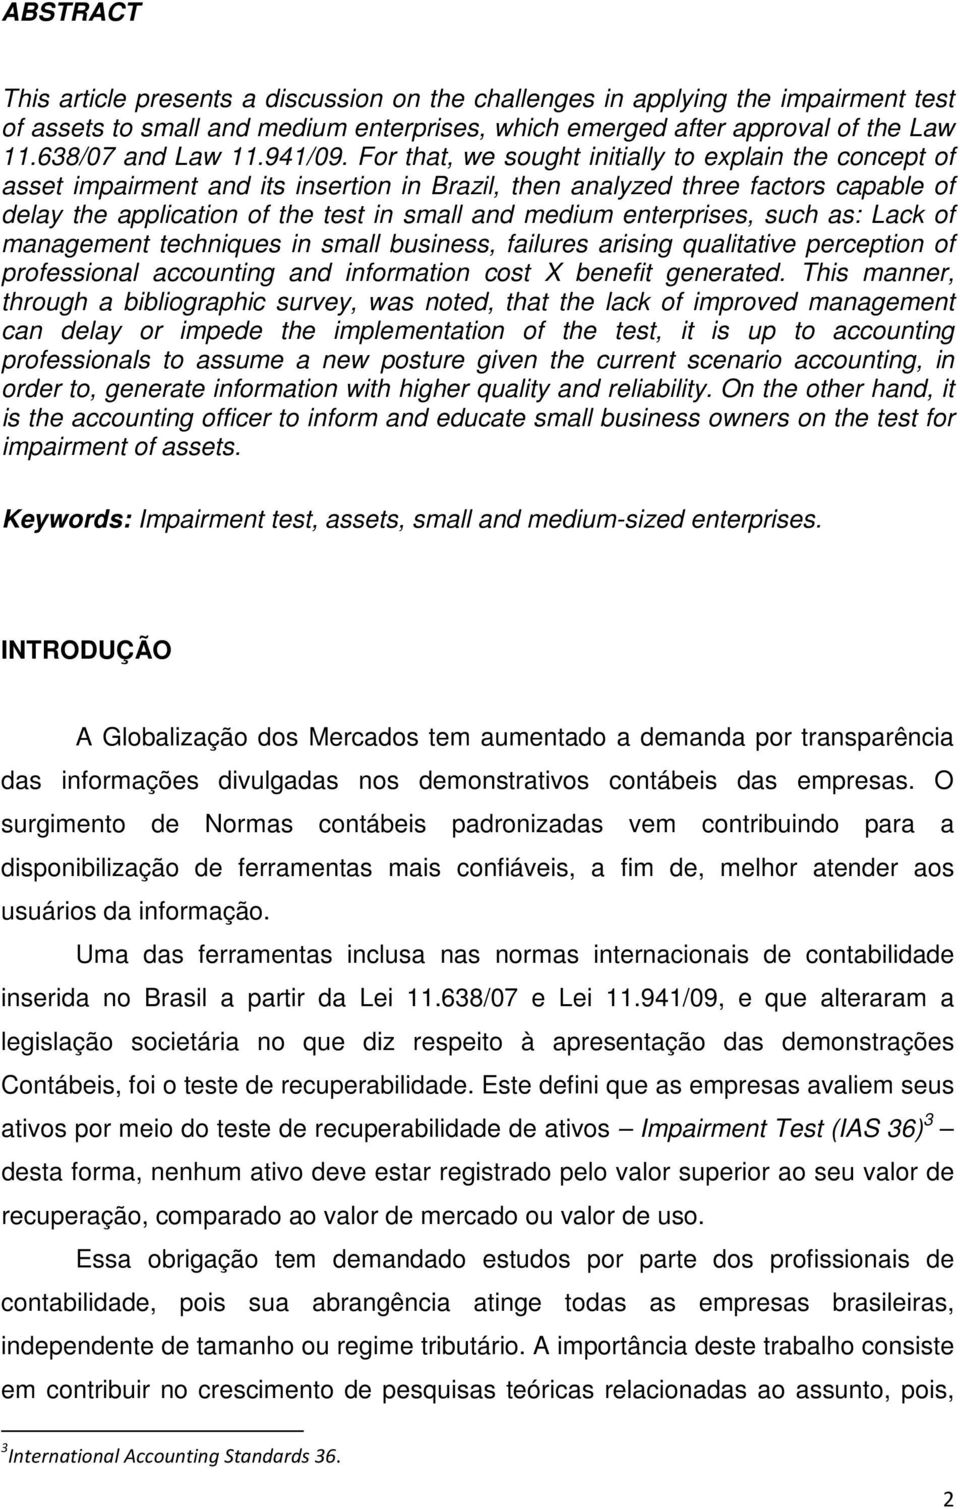 For that, we sought initially to explain the concept of asset impairment and its insertion in Brazil, then analyzed three factors capable of delay the application of the test in small and medium